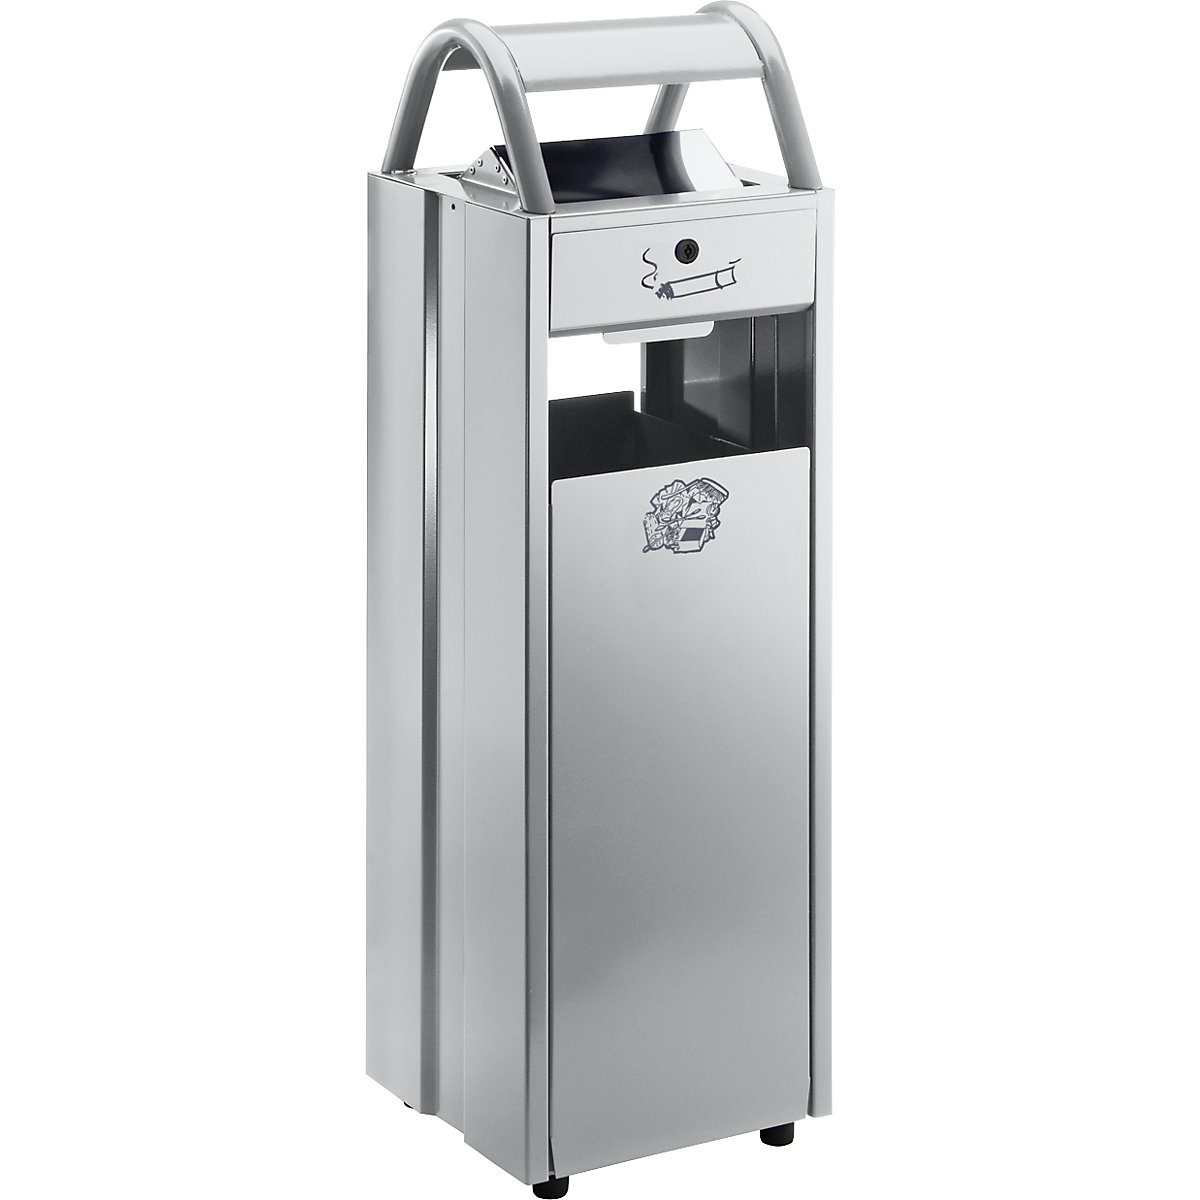 Waste collector with ashtray and rain protection hood – VAR, capacity 35 l, WxHxD 300 x 960 x 250 mm, silver-5